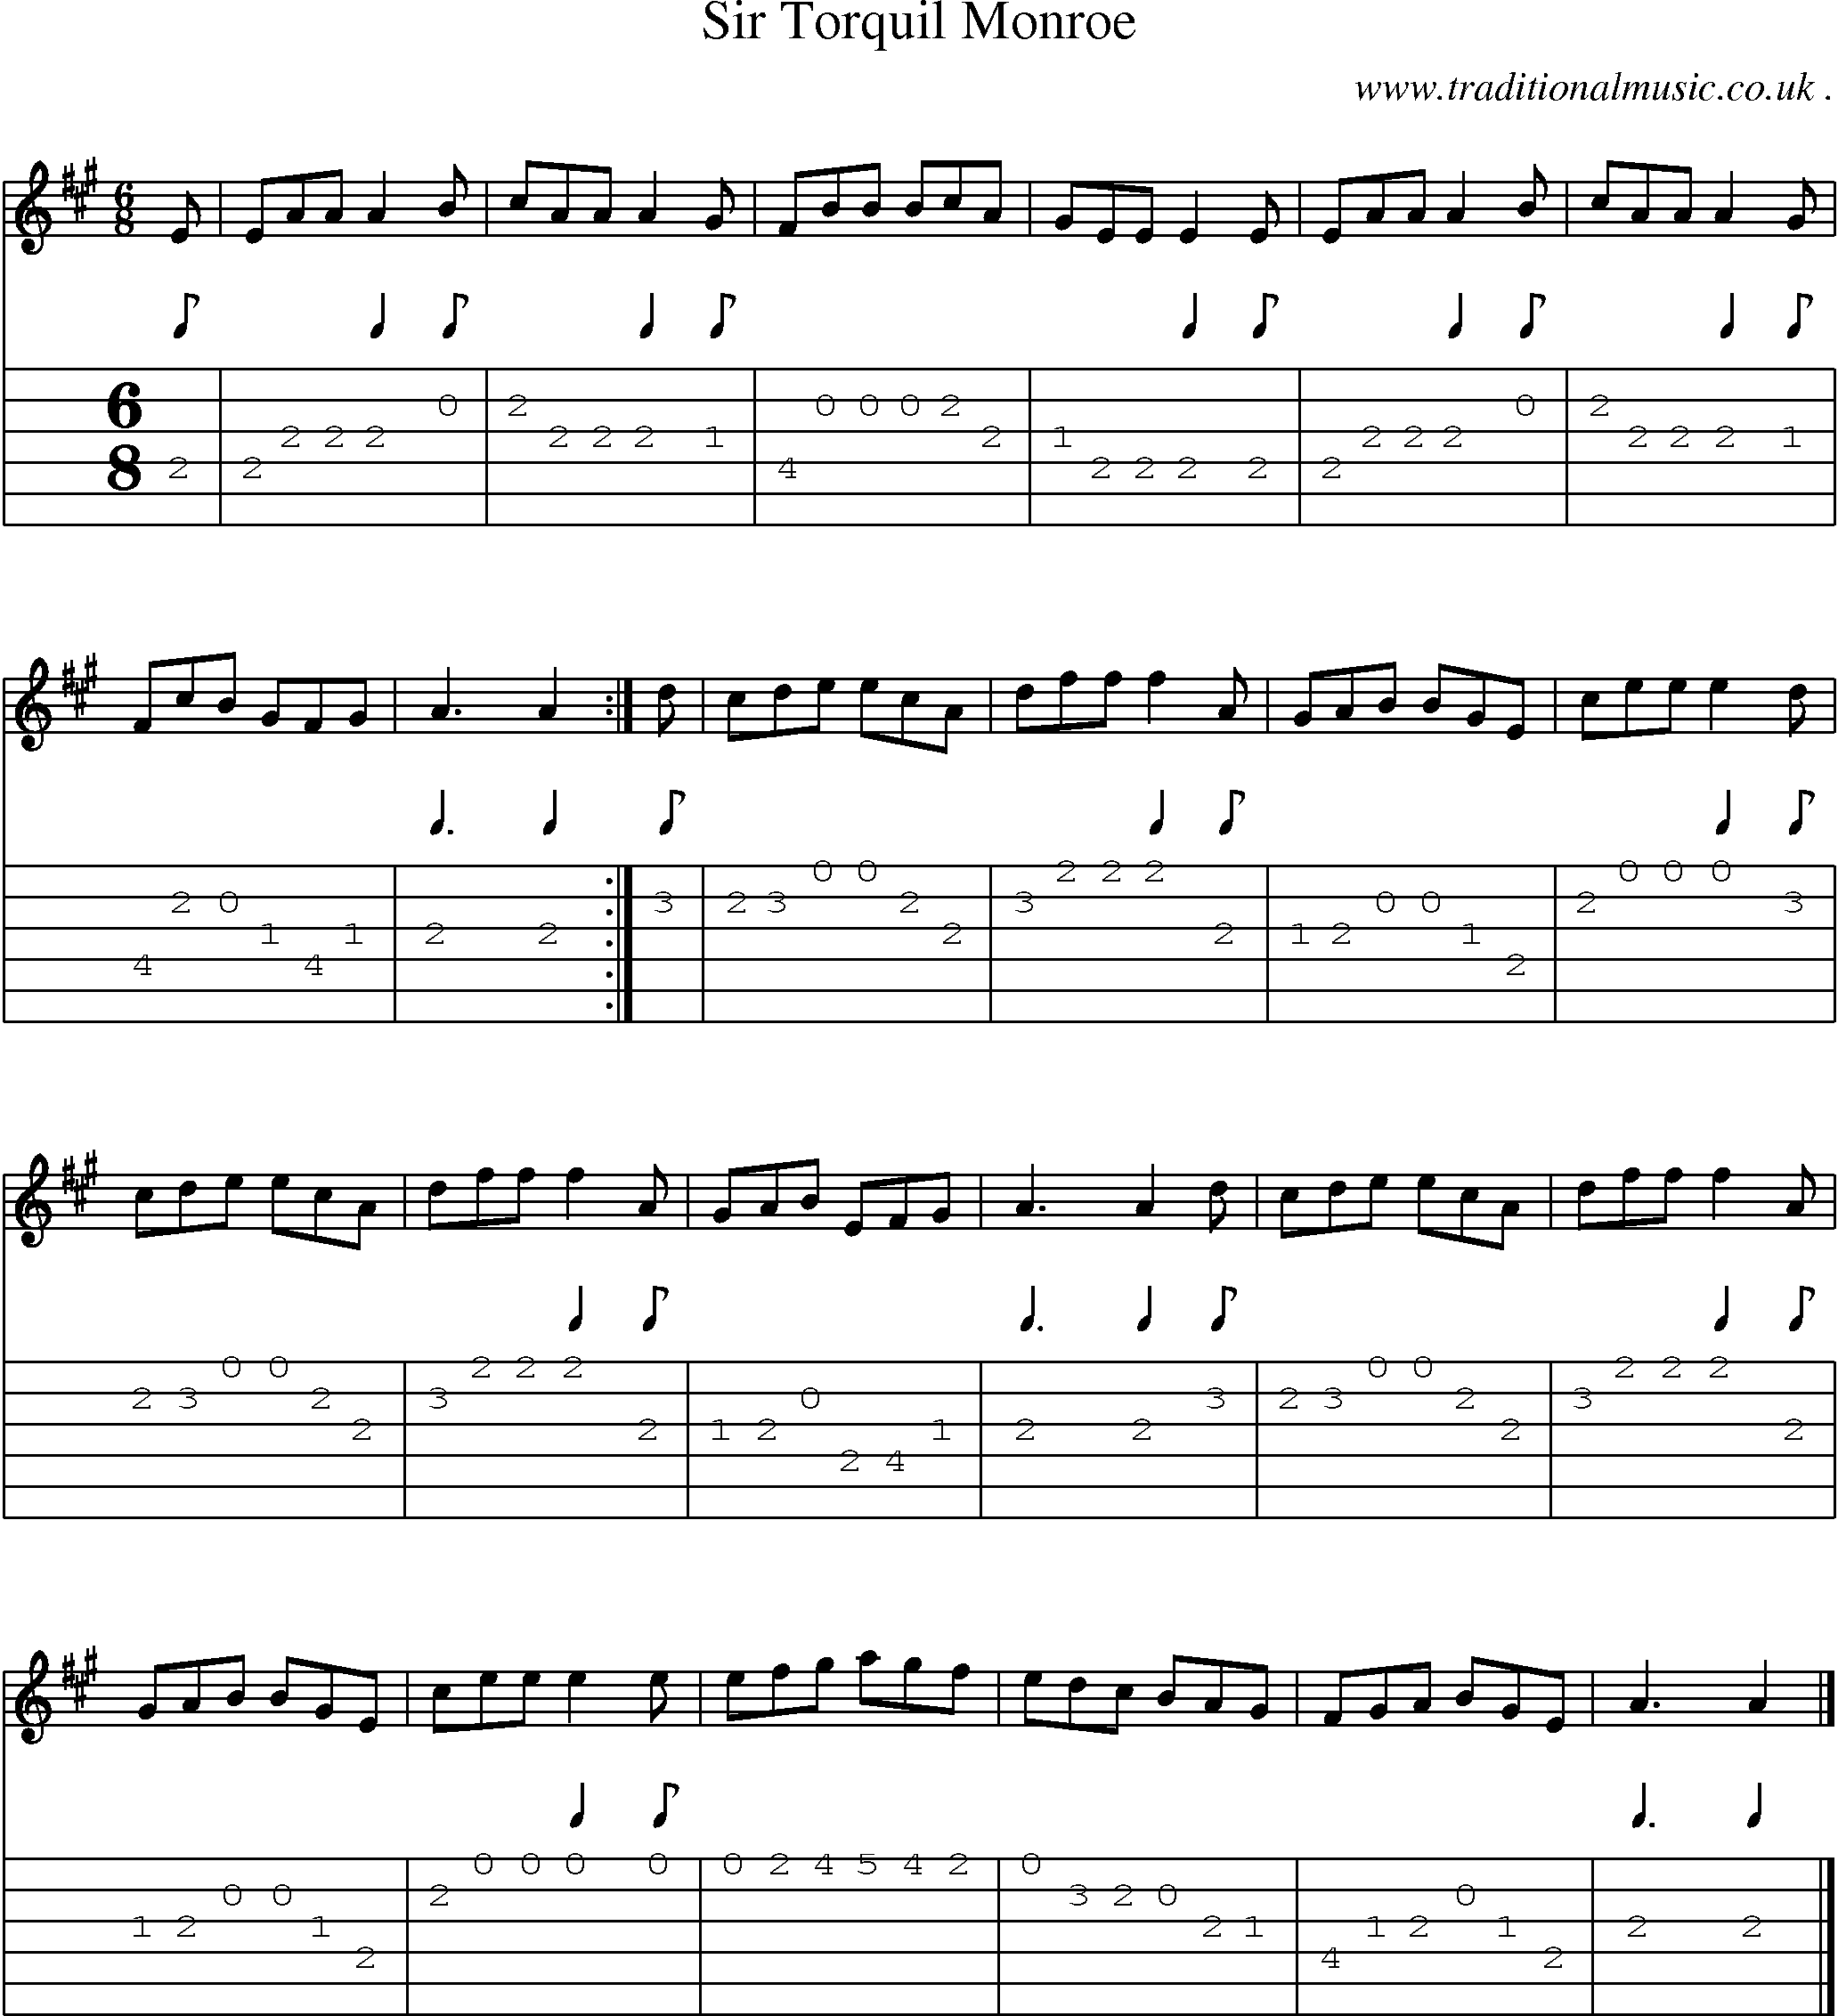 Sheet-music  score, Chords and Guitar Tabs for Sir Torquil Monroe